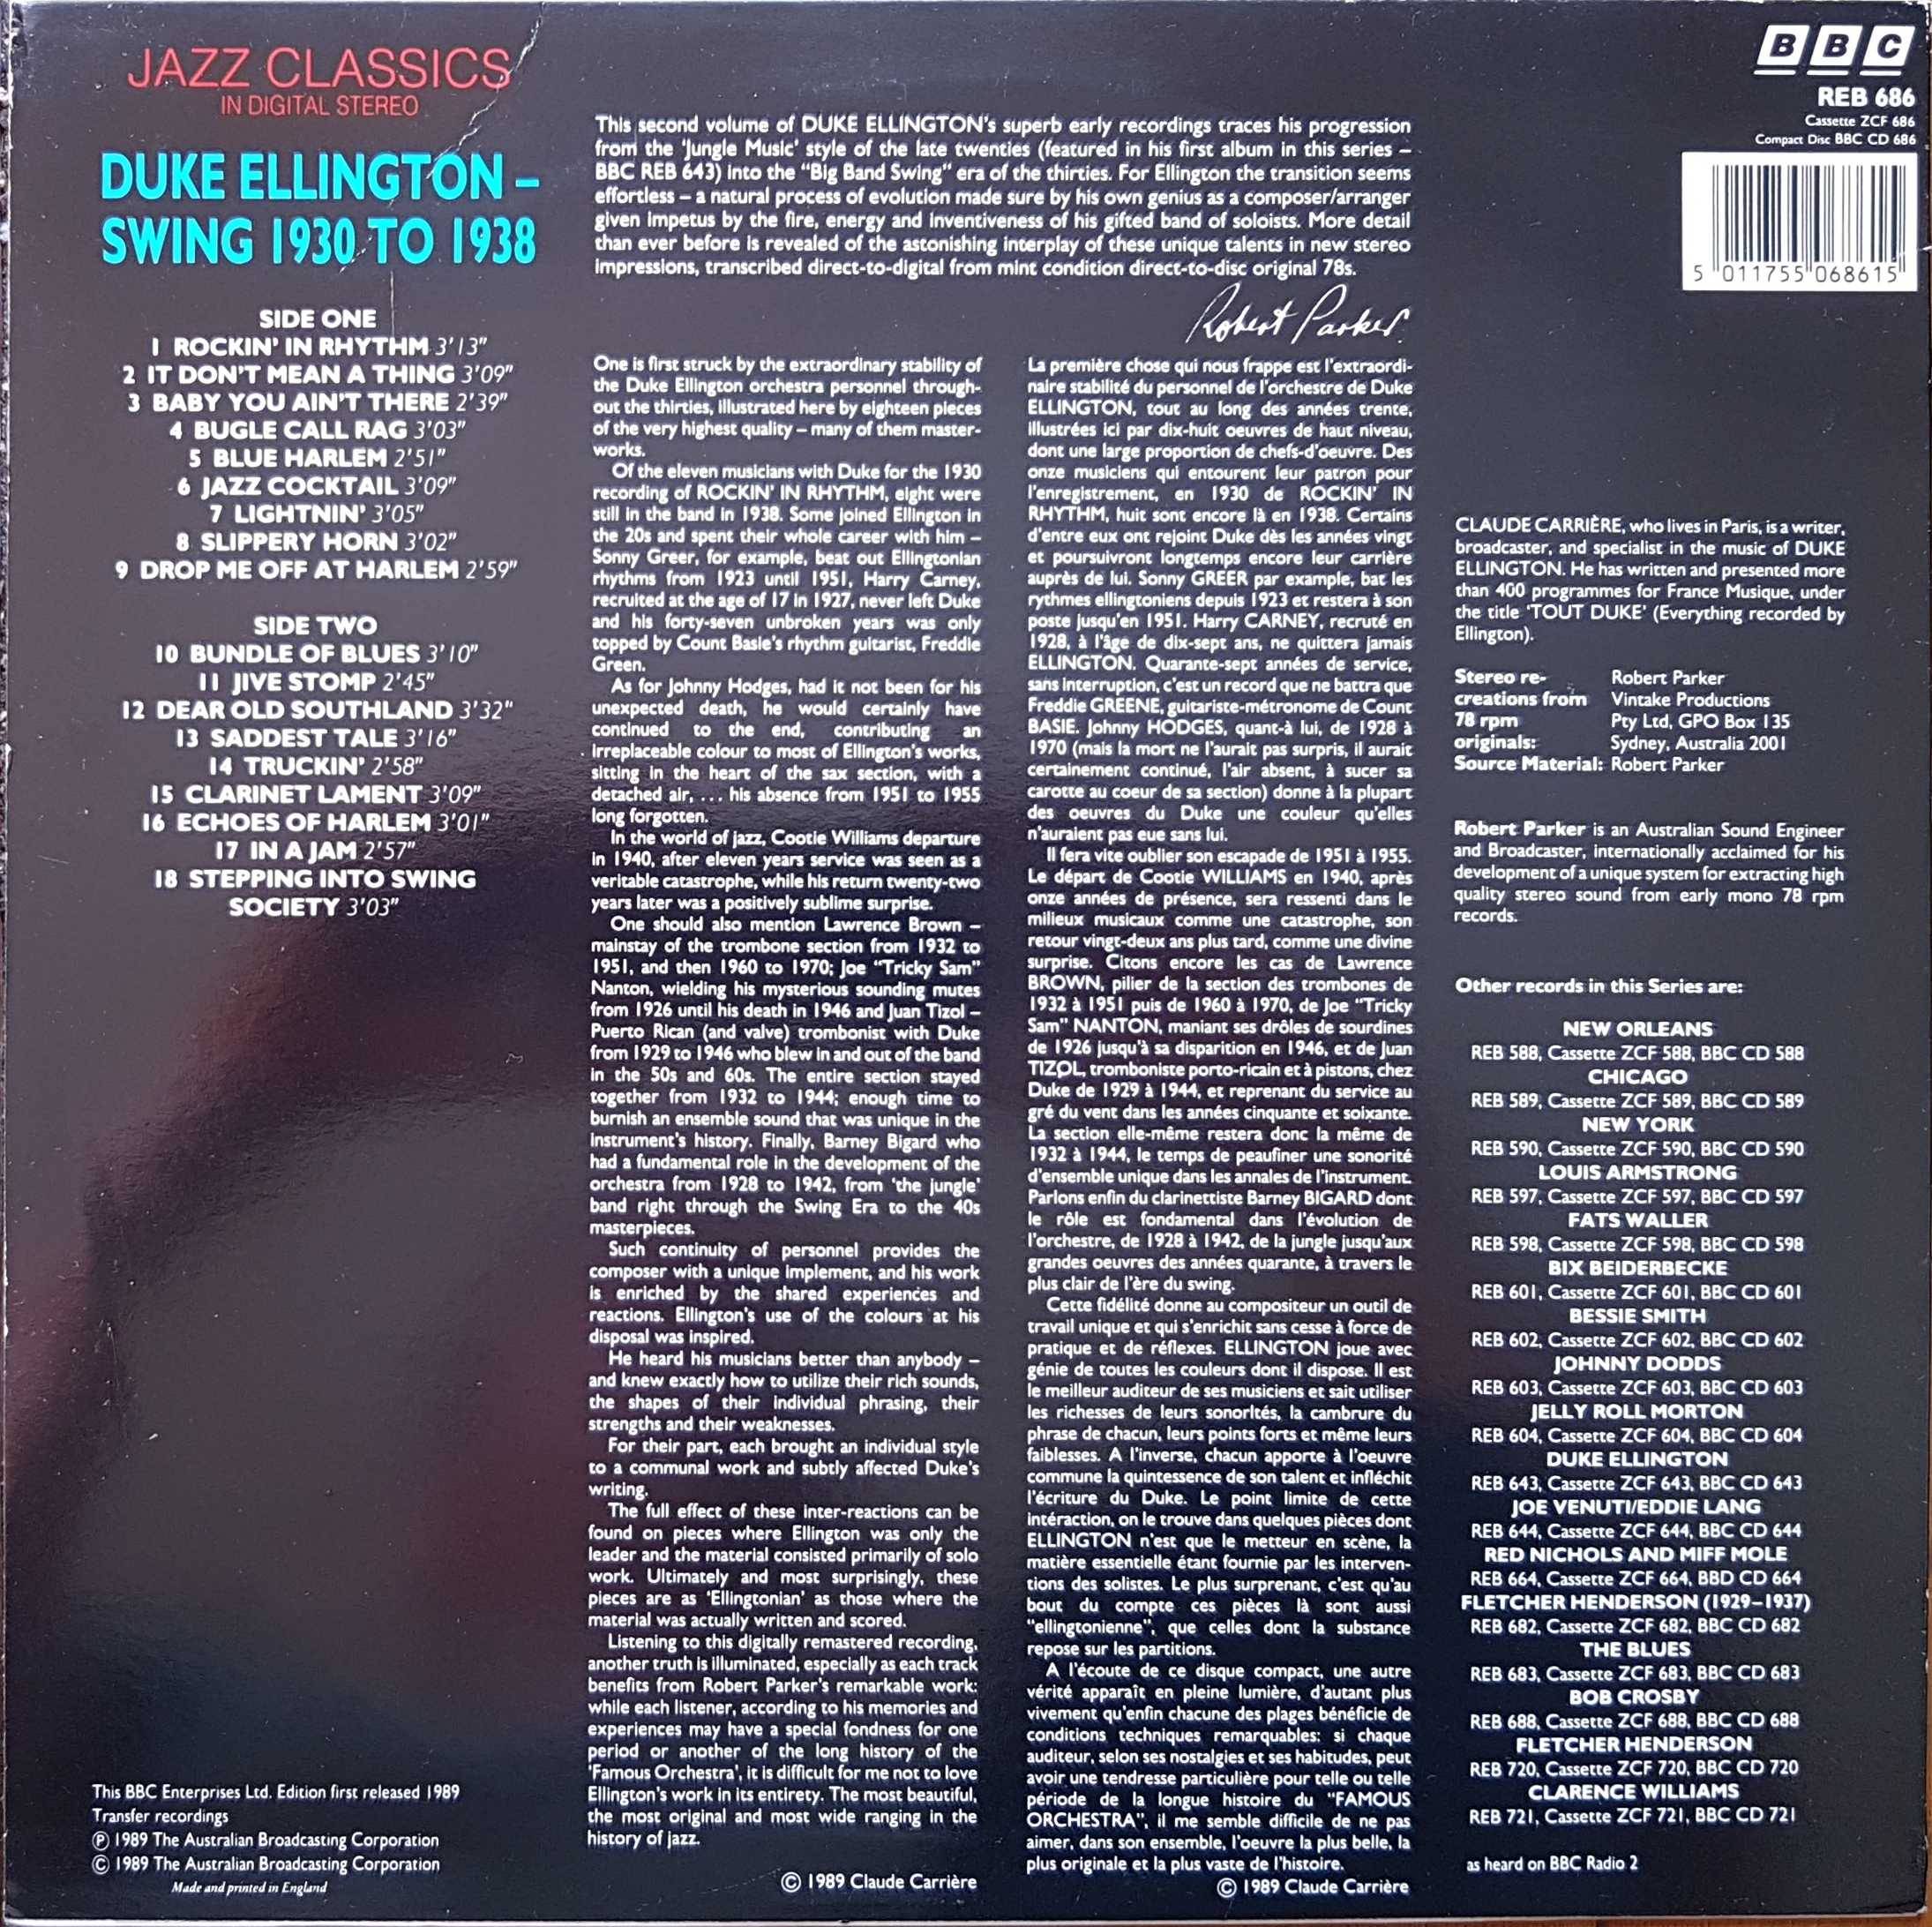 Picture of REB 686 Jazz classics - Duke Ellington by artist Duke Ellington from the BBC records and Tapes library